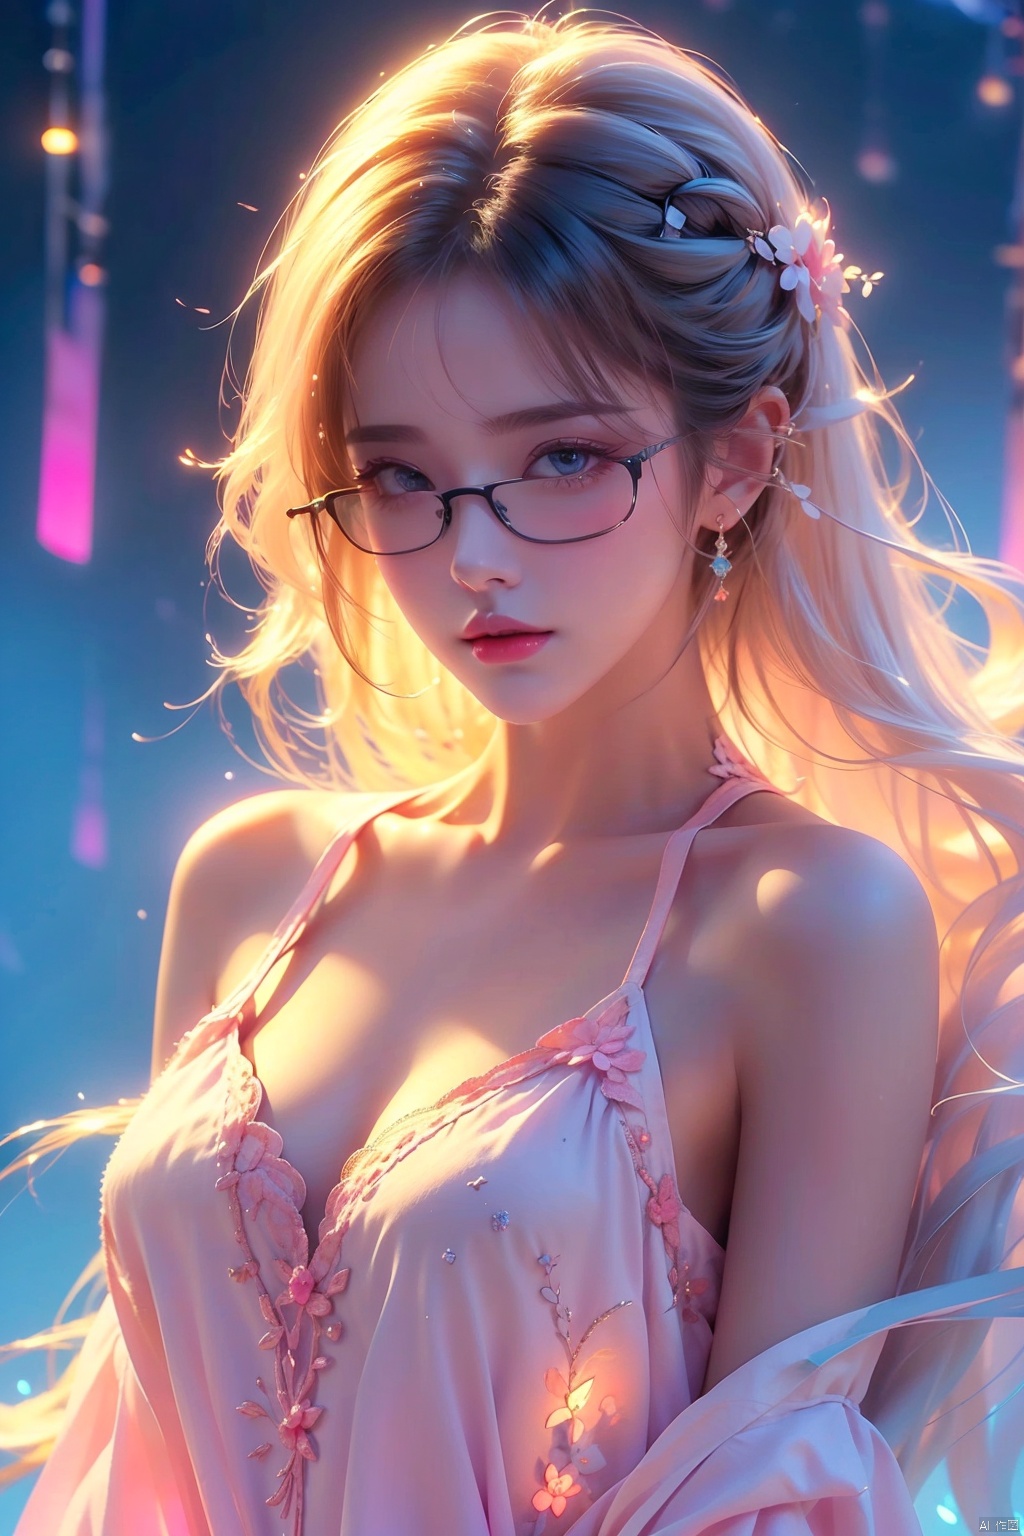 Dimensional Armory,Lying in bed, looking from above,Anime girl in bare-shoulder dress,glowing eyes,with long white hair,wearing black glasses frame,glowing pink special effects,gradient pink and blue Lights,light blue background,rich details, the eyes,ultra high resolution,32K UHD,best quality,masterpiece,